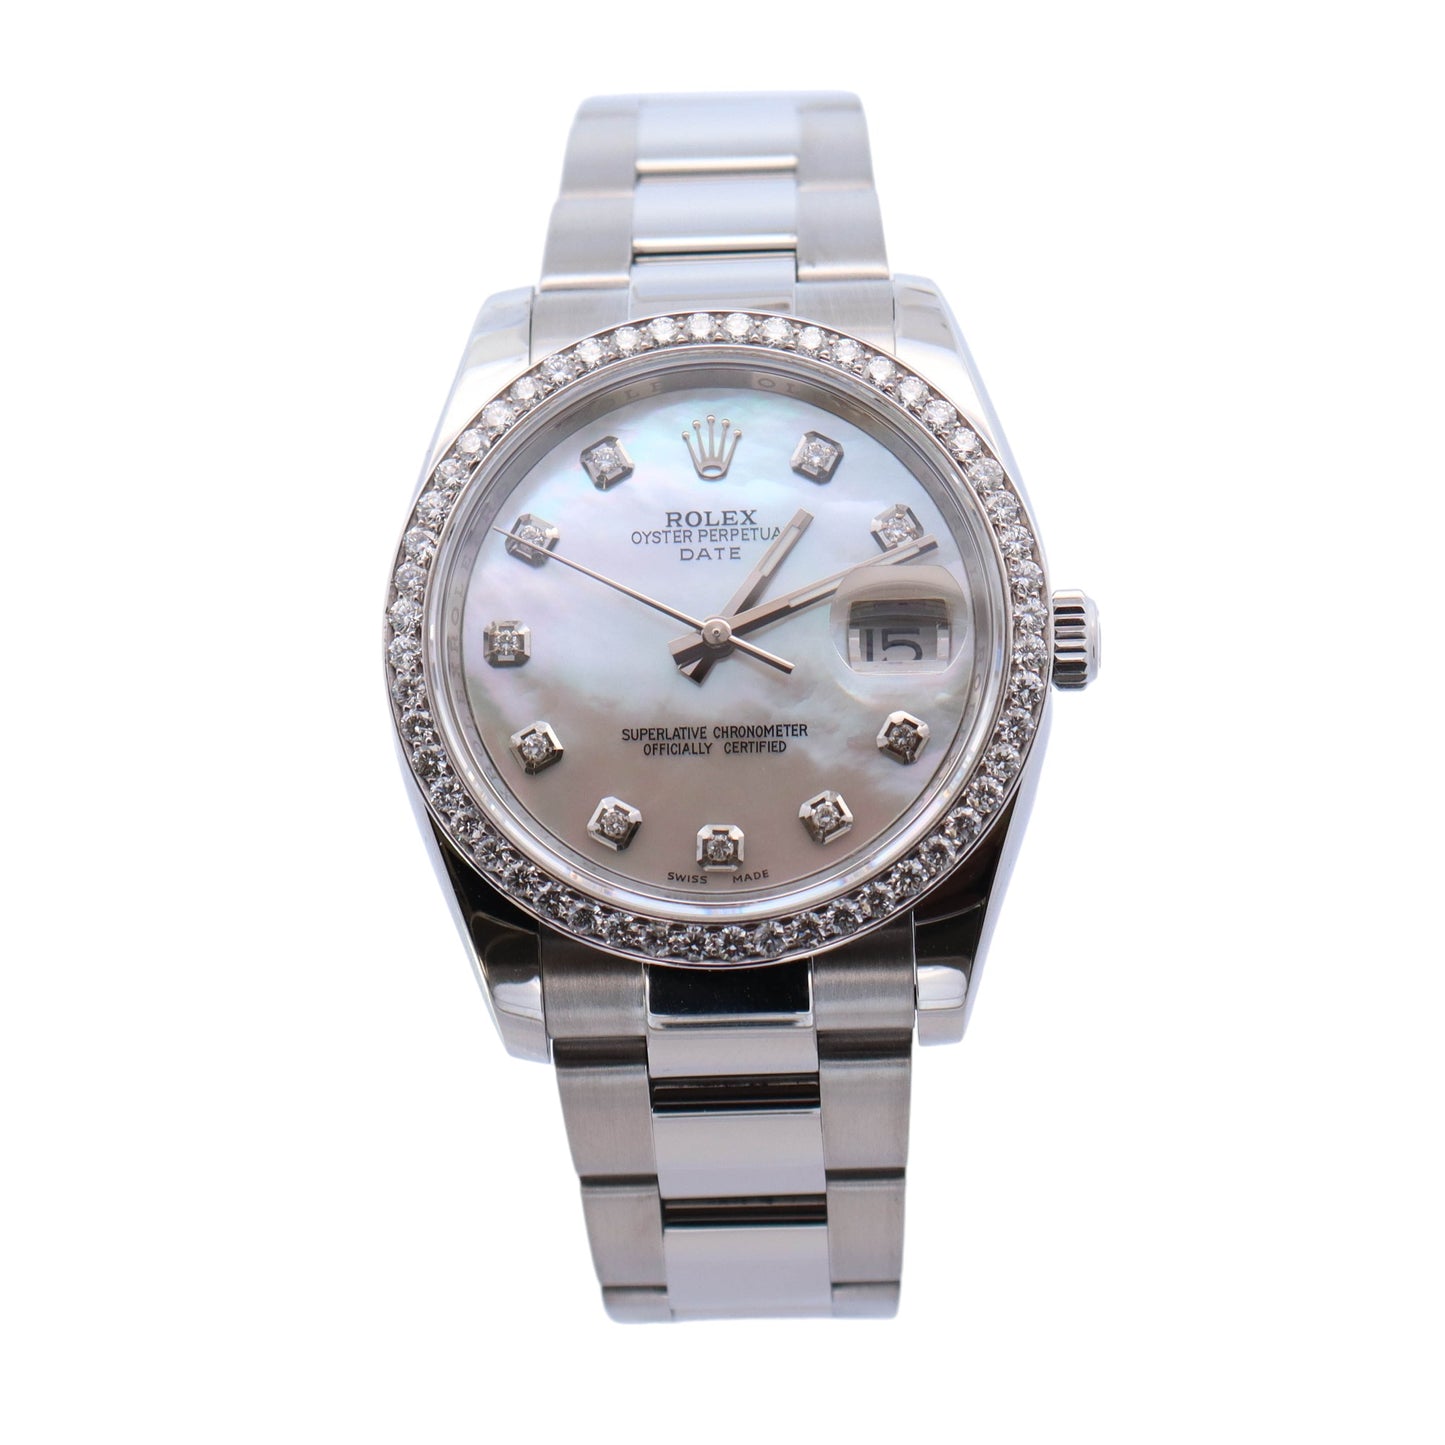 Rolex Oyster Perpetual Date 34mm Stainless Steel Custom White MOP Diamond Dial Watch  Reference #: 115200 - Happy Jewelers Fine Jewelry Lifetime Warranty